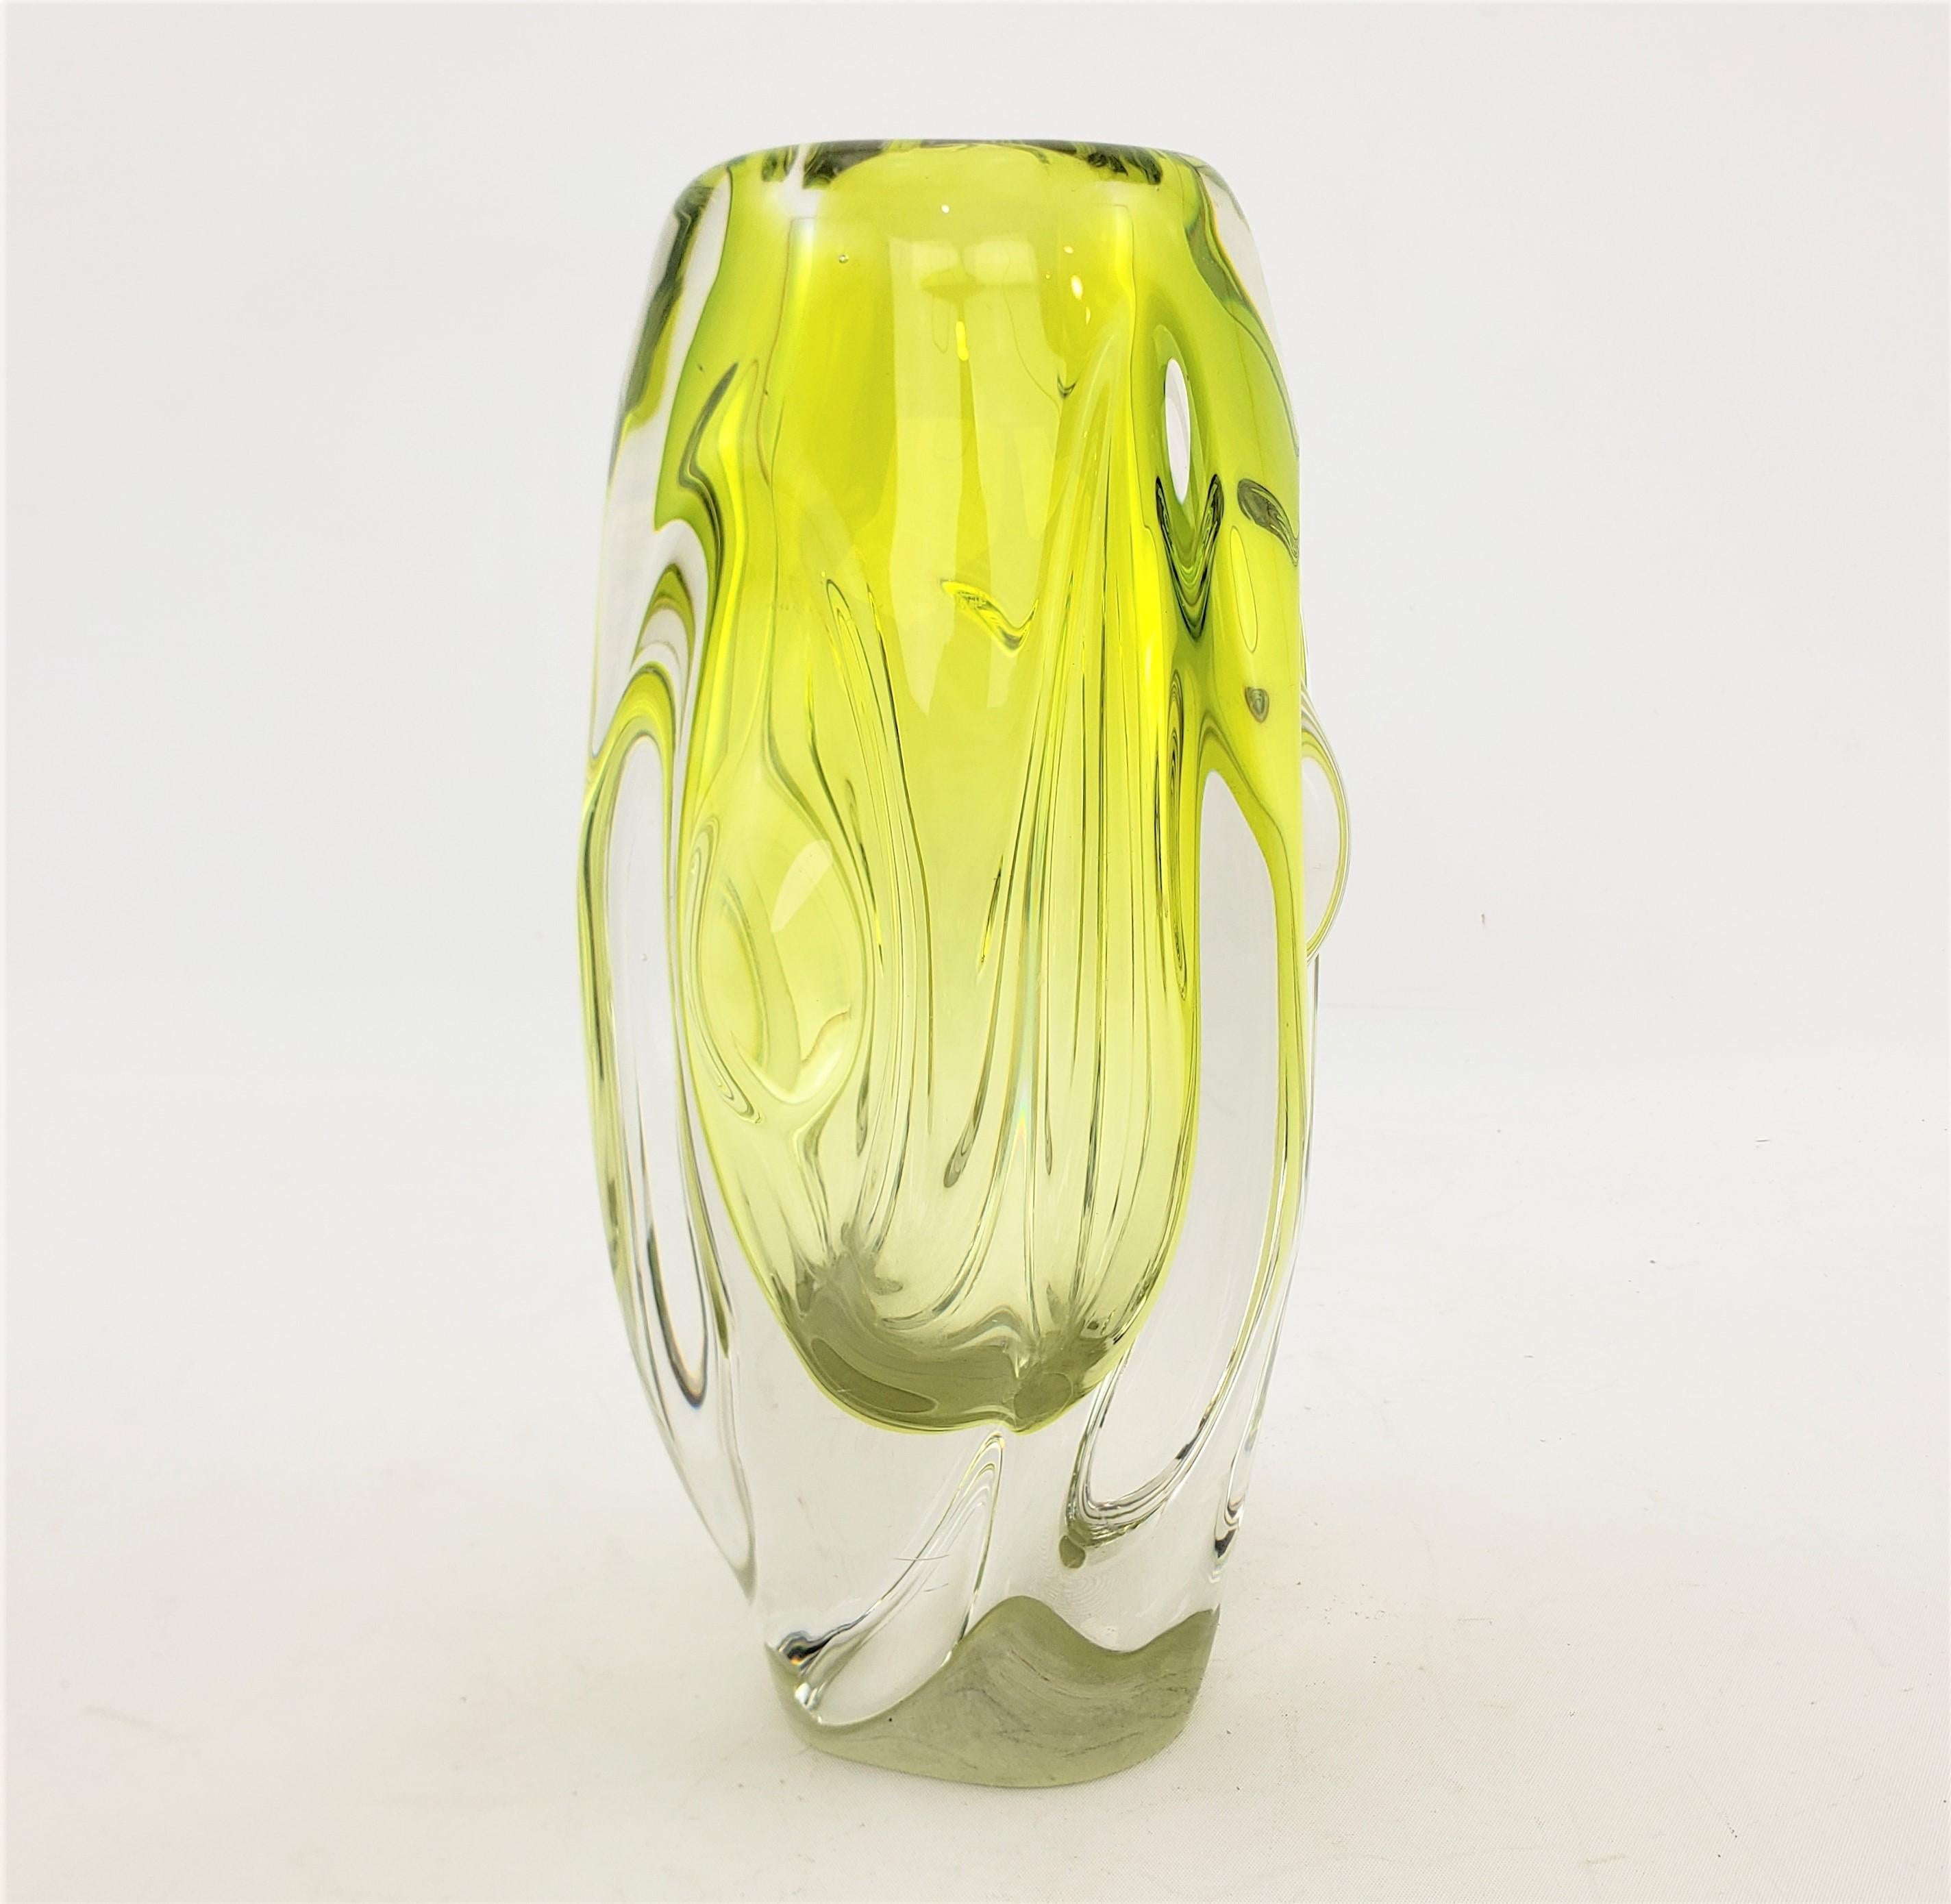 This art glass vase is unsigned, but presumed to originate from the Czech Republic and dating to approximately 1955 and done in the period Mid-Century Modern style. This vase is done with a thick clear glass with a submerged inner inclusion of